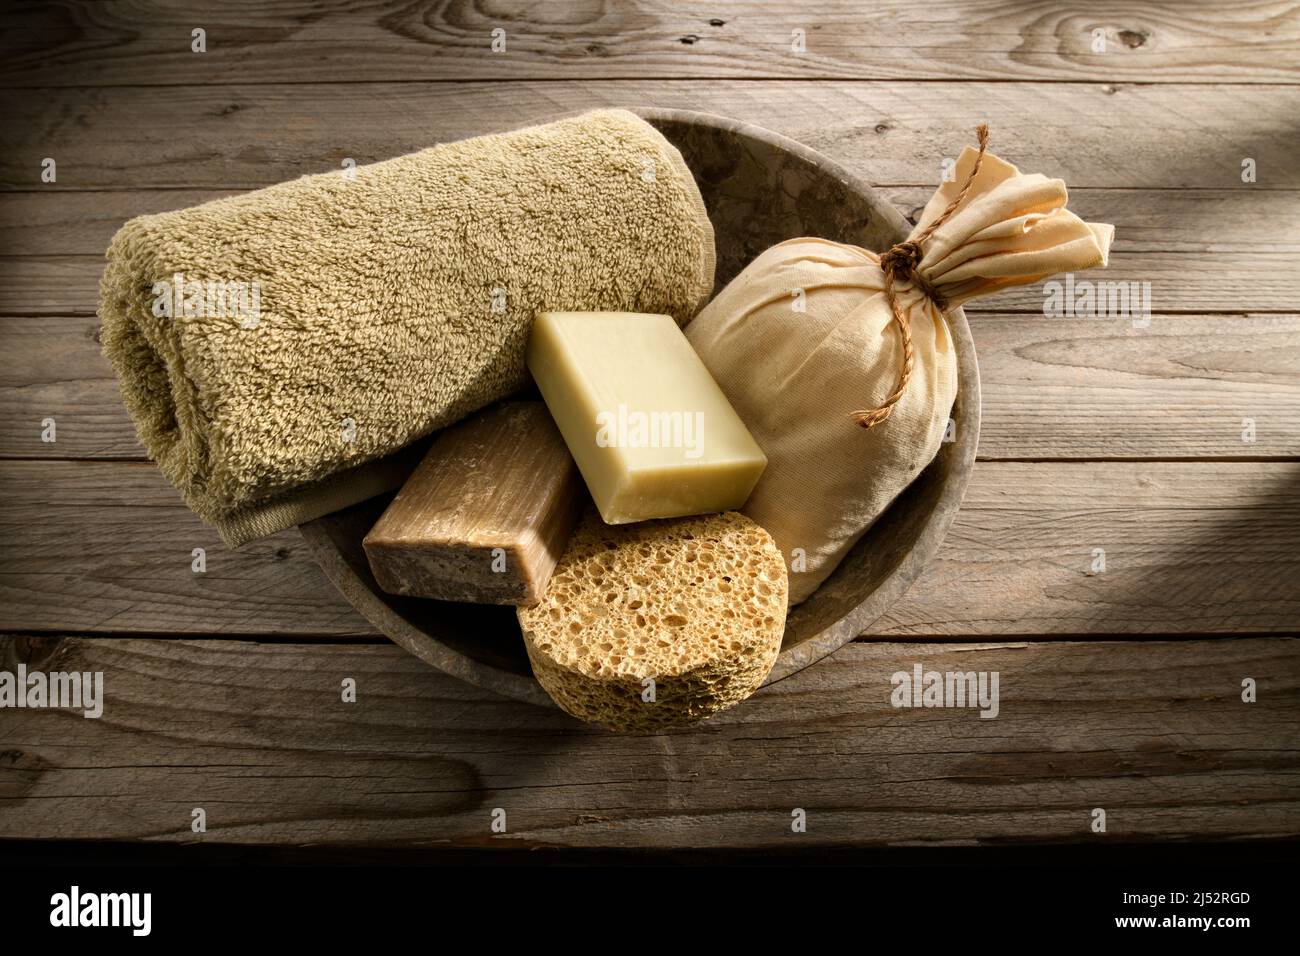 Body care products on wood table Stock Photo